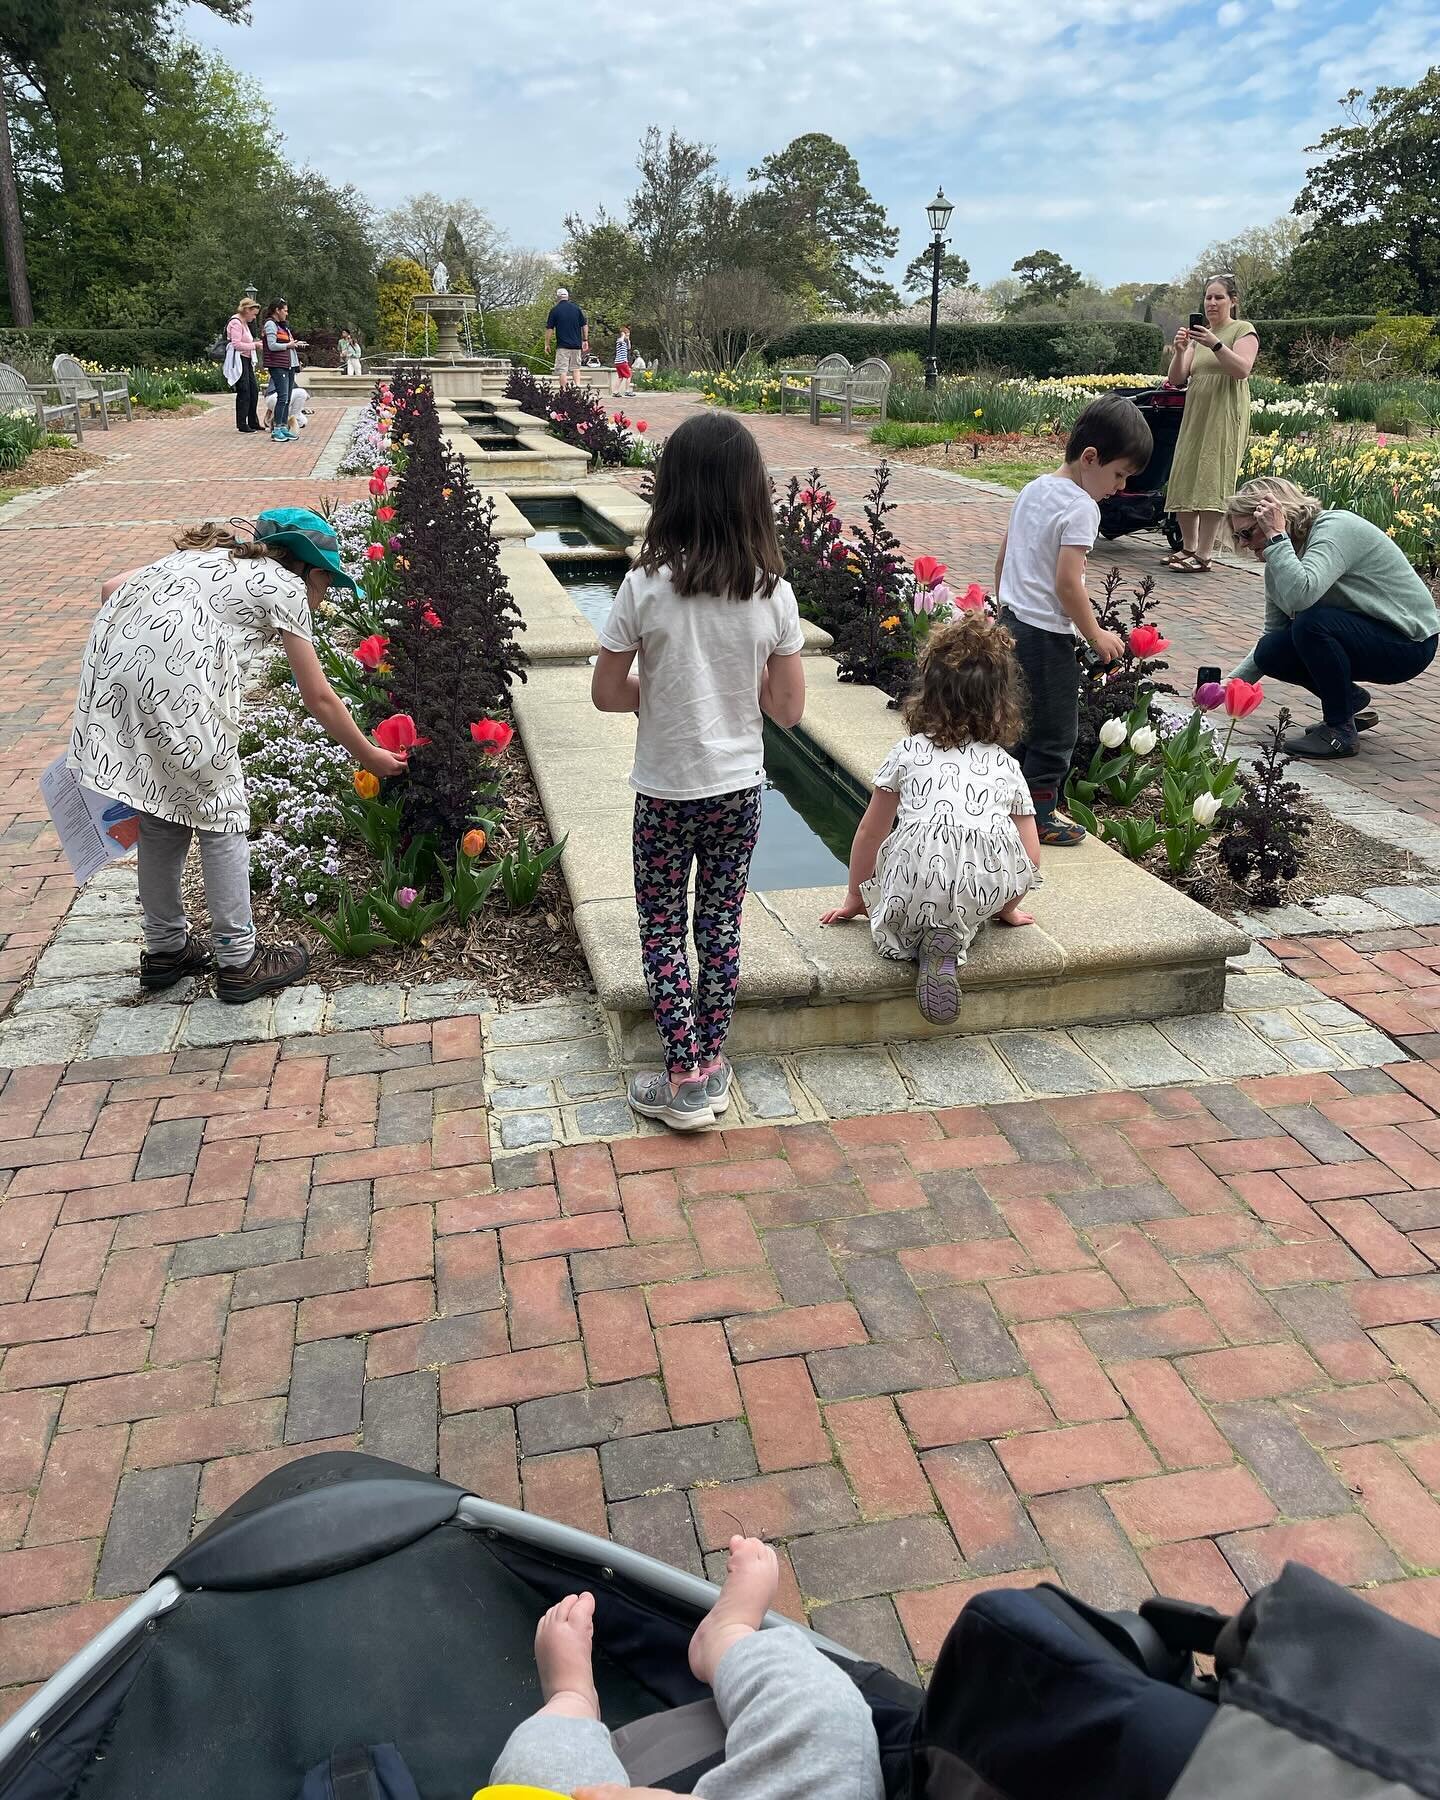 Gardens, friends, stroller mess and exhausted kids! VA keeps on winning!